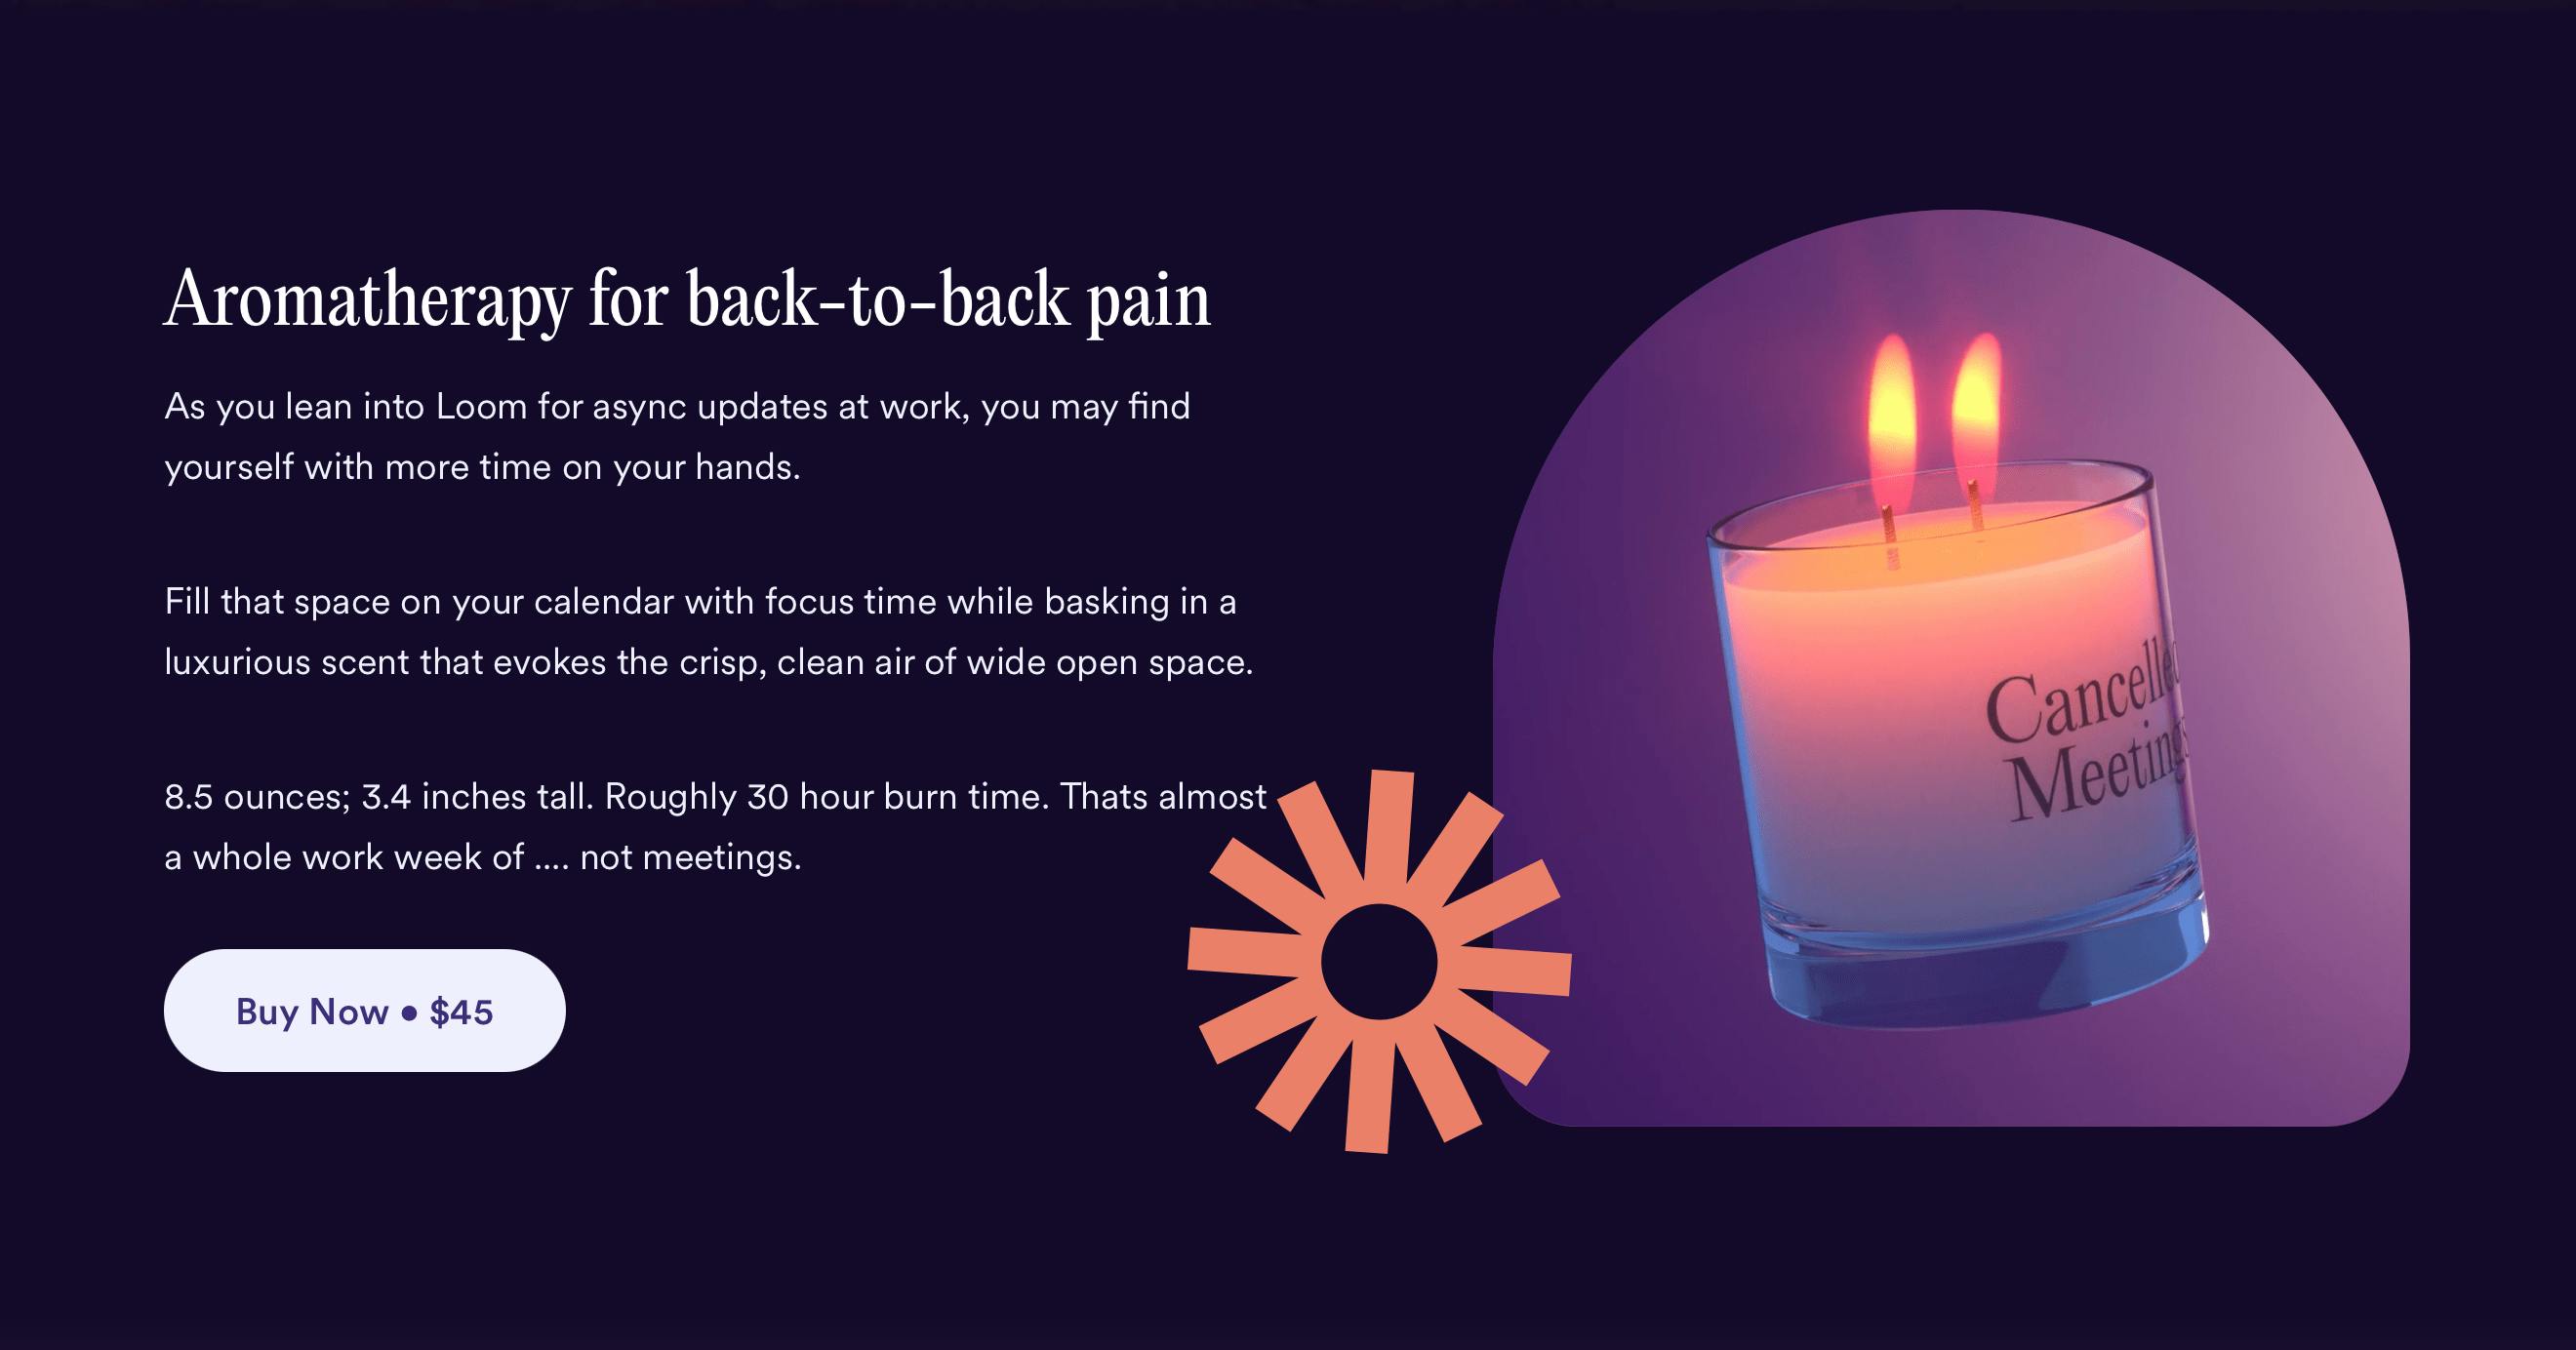 Aromatherapy for back-to-back pain